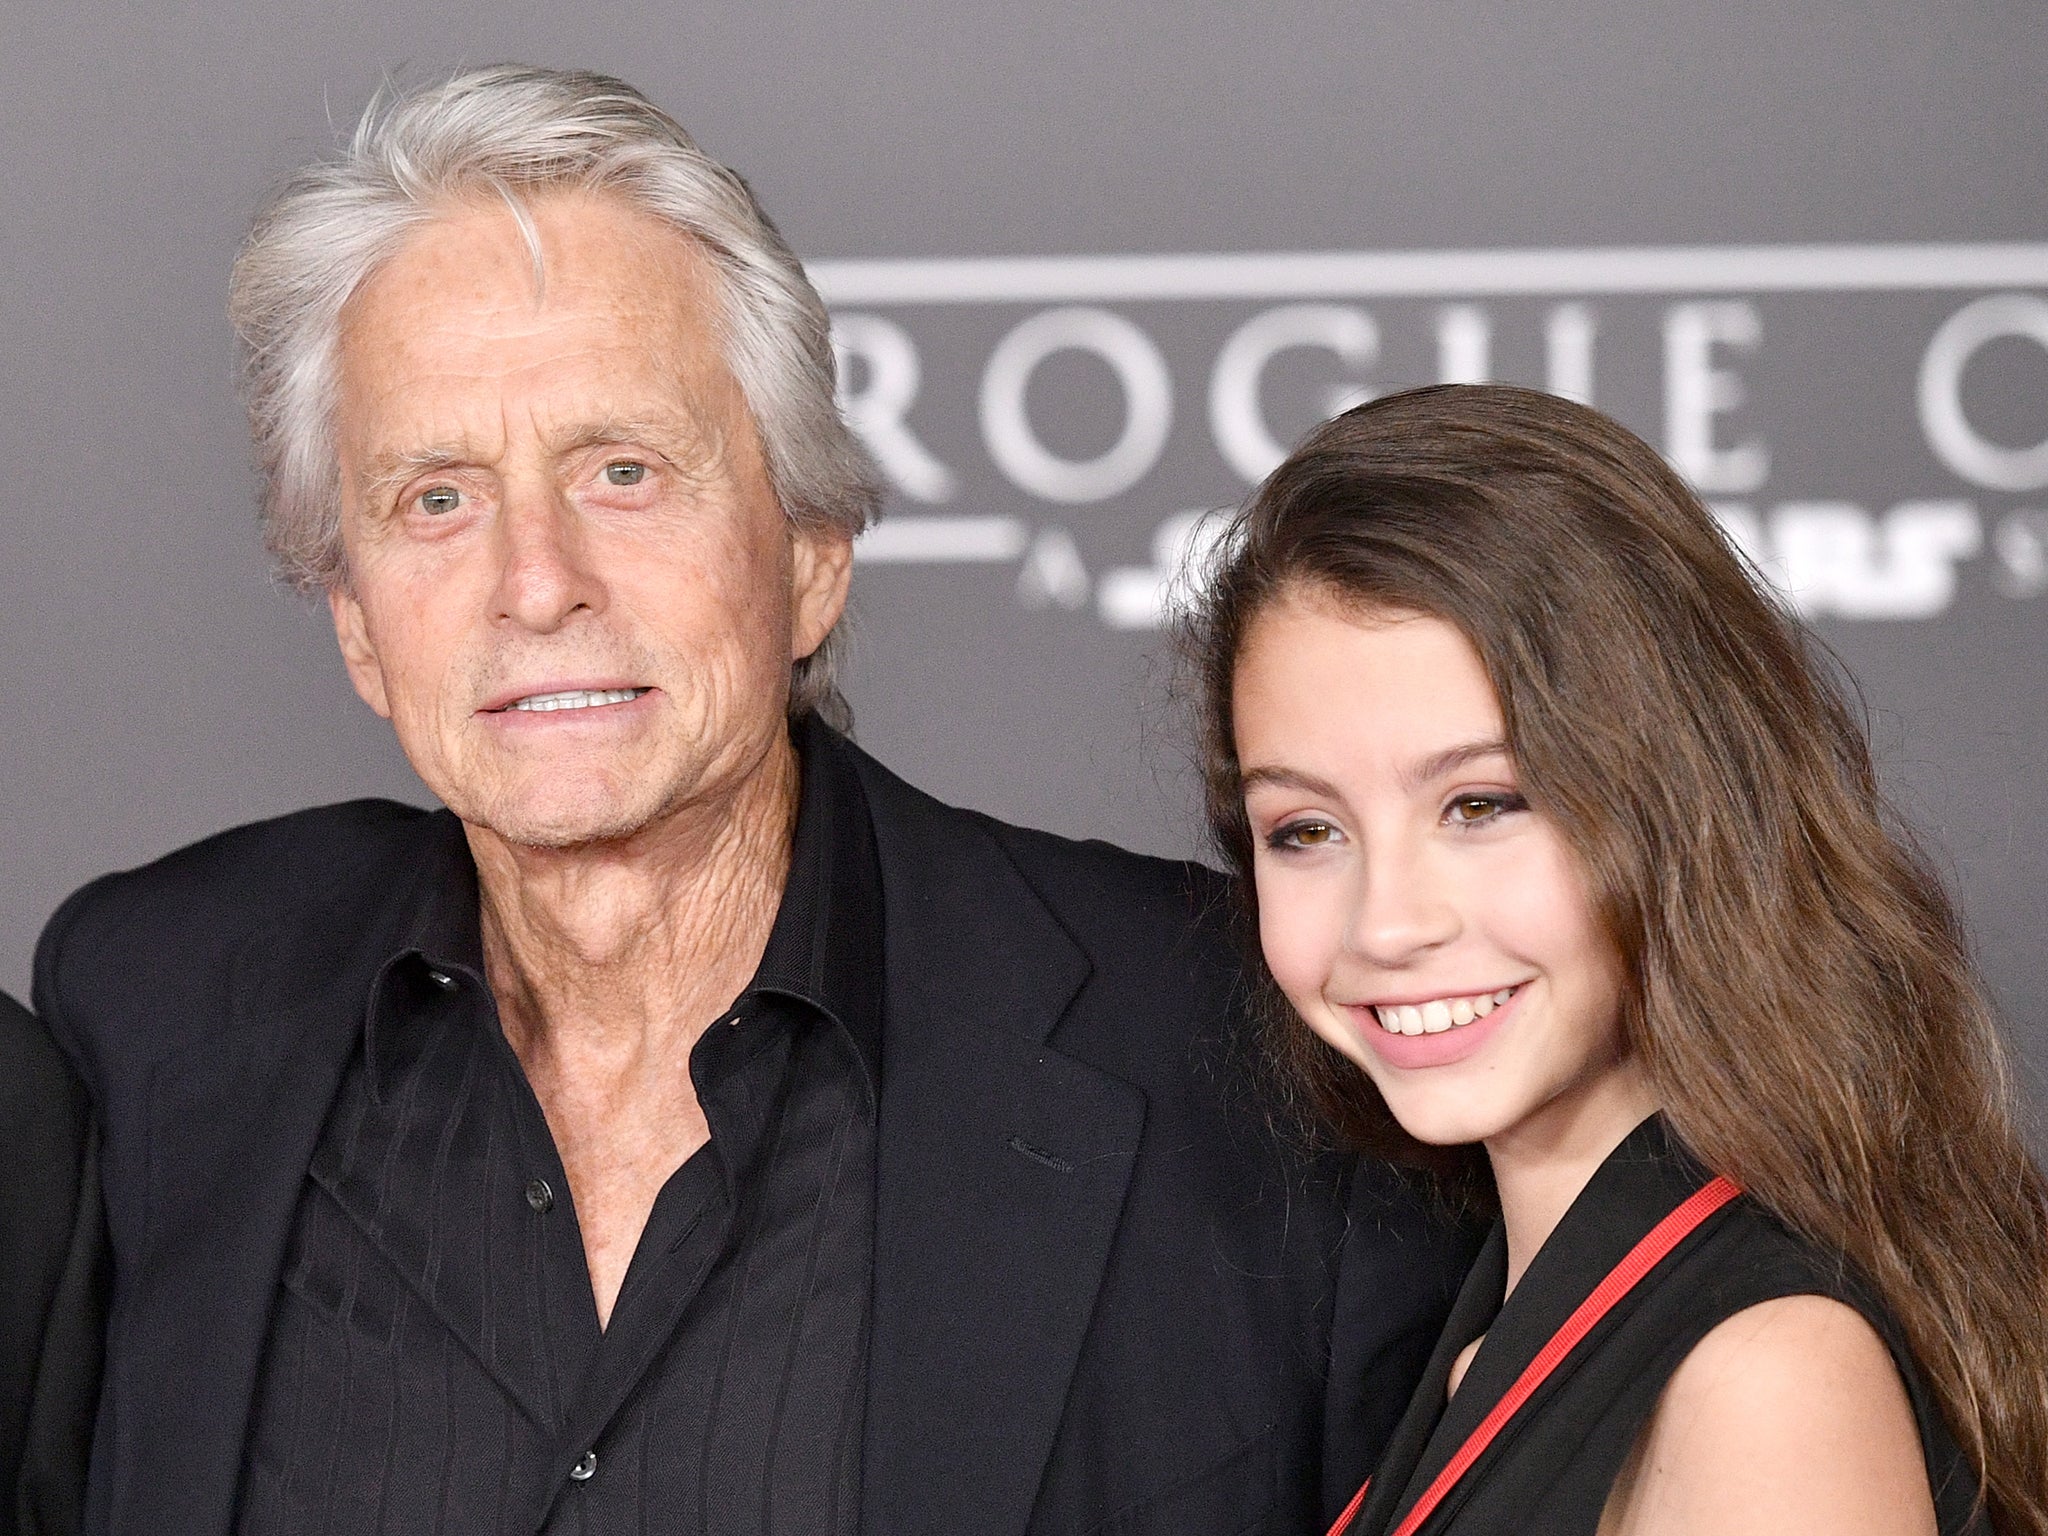 Michael Douglas, 76, was confused for 18-year-old daughters grandfather at her graduation The Independent image photo